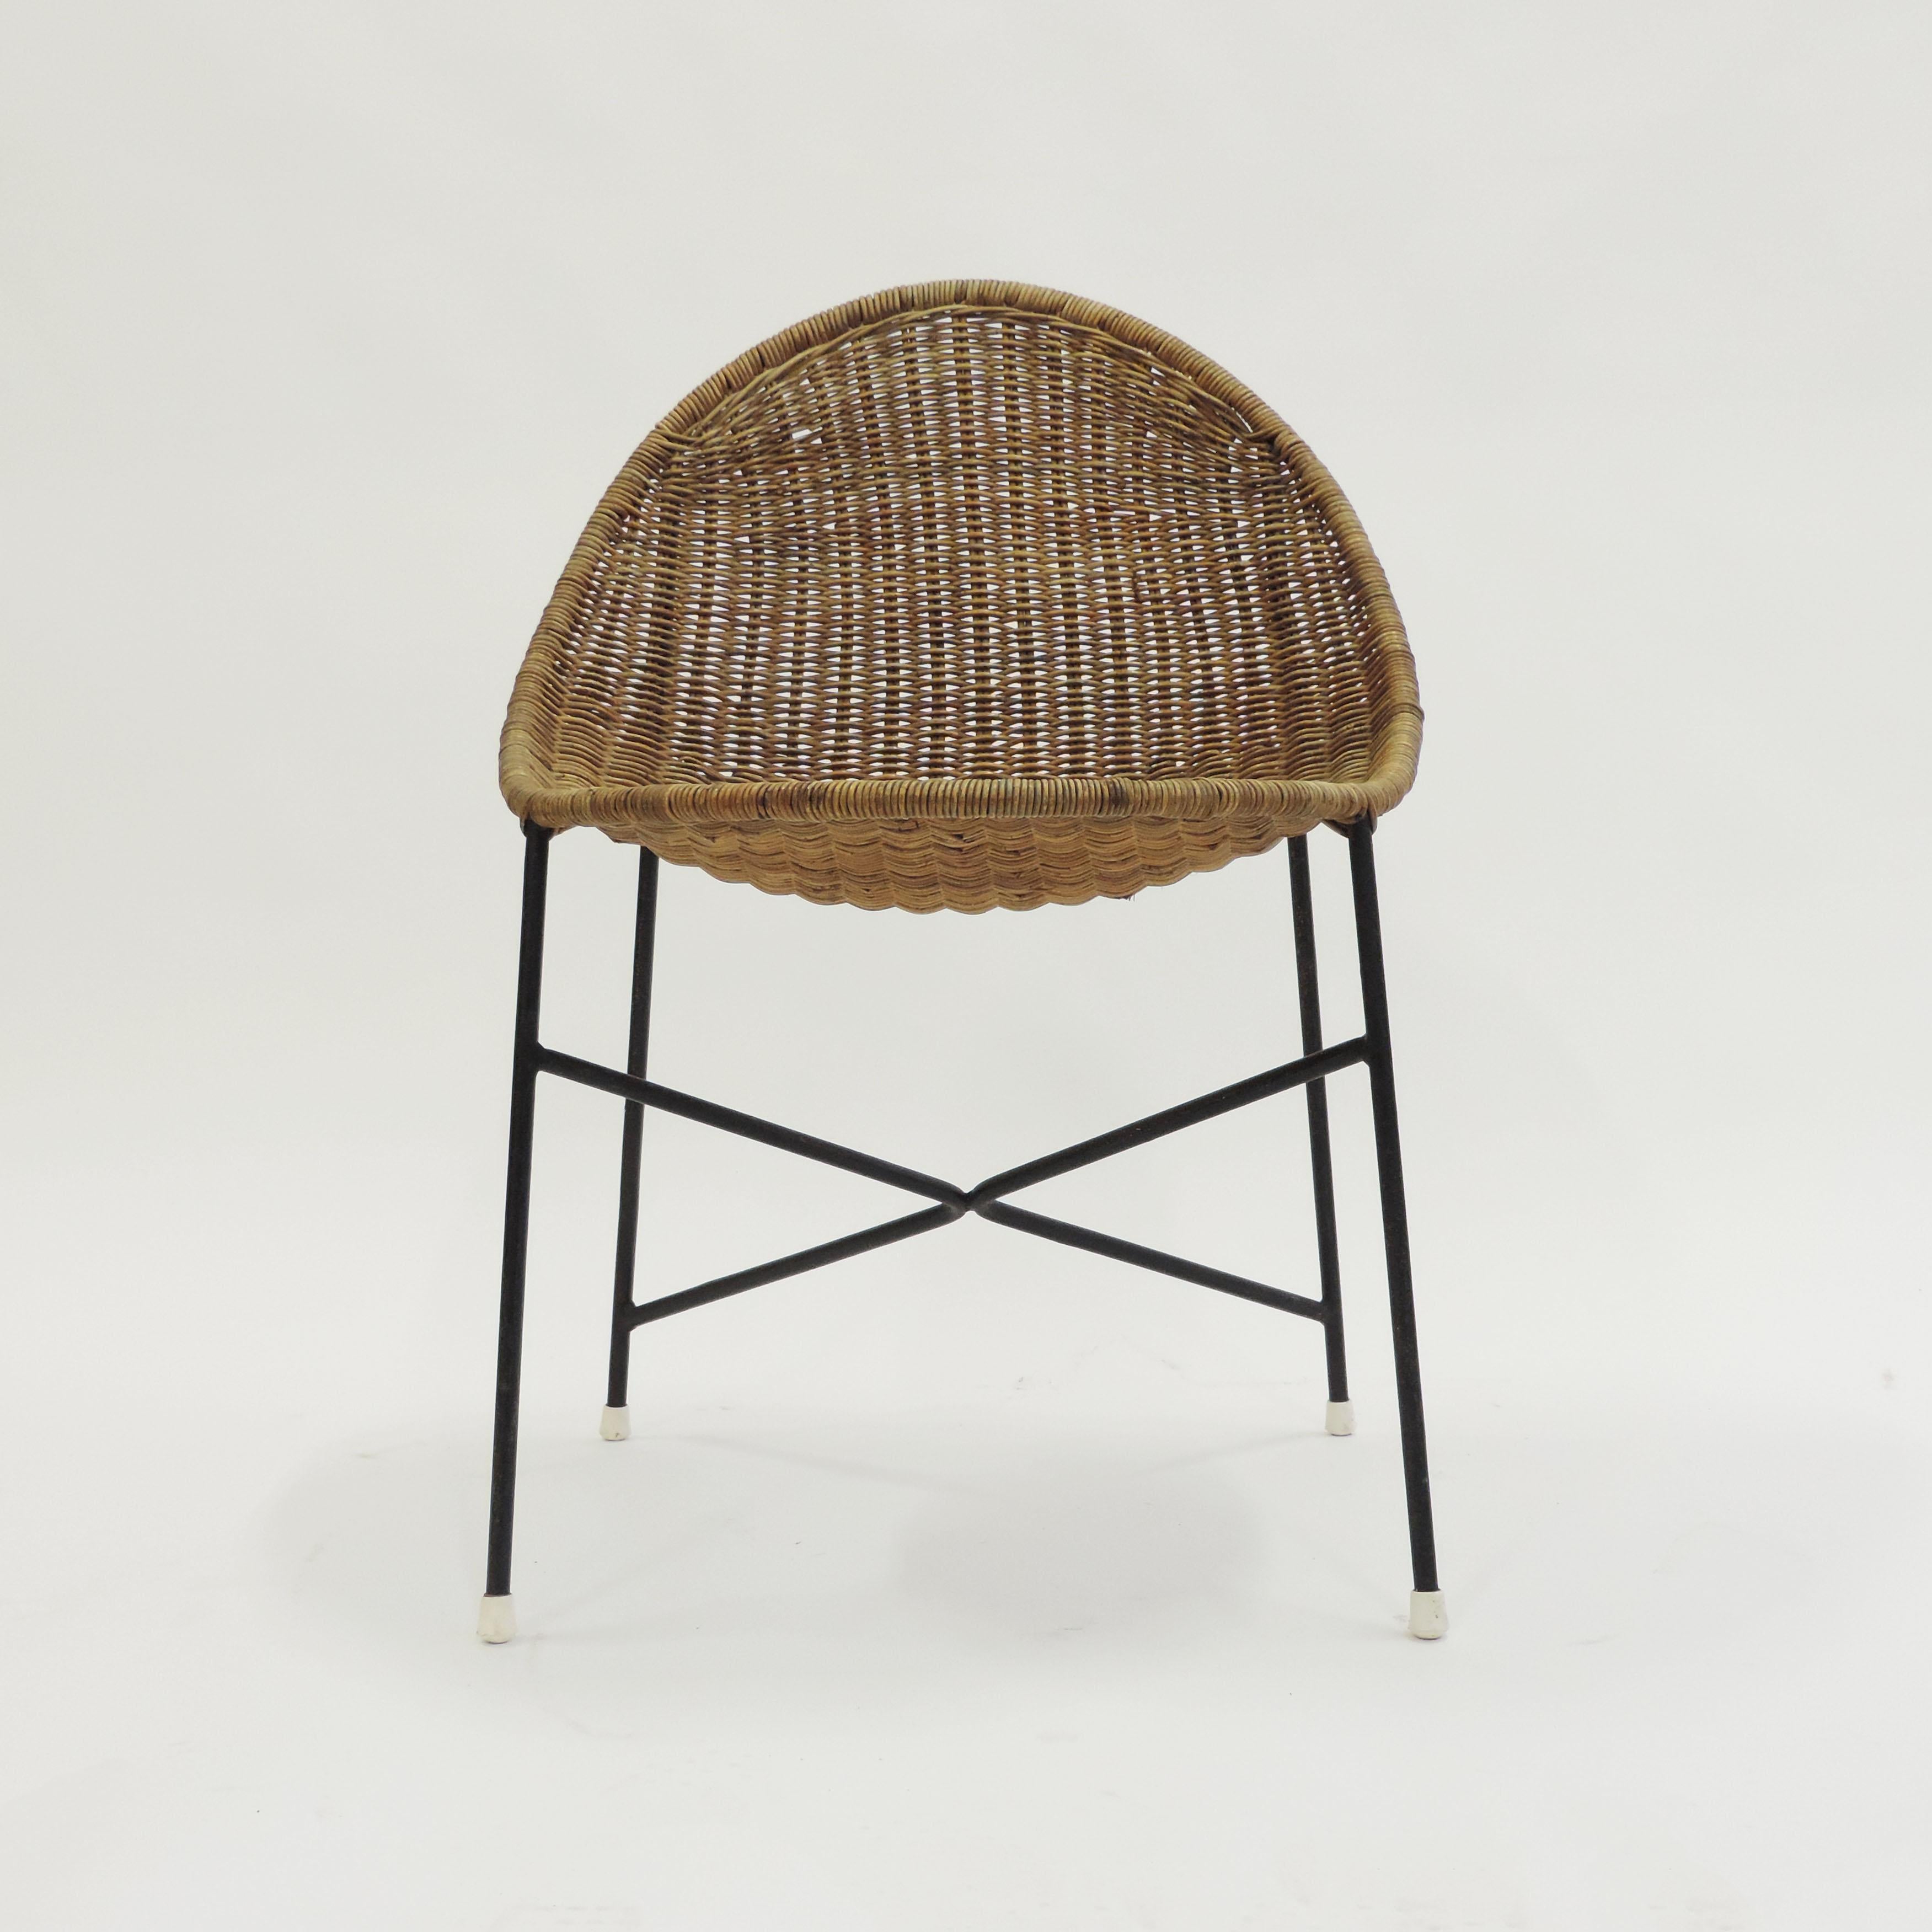 Georges and Hermine Laurent Wicker and Metal Chair, 1950s
Reference: Rivista dell'Arredamento No. 10 p. 14
